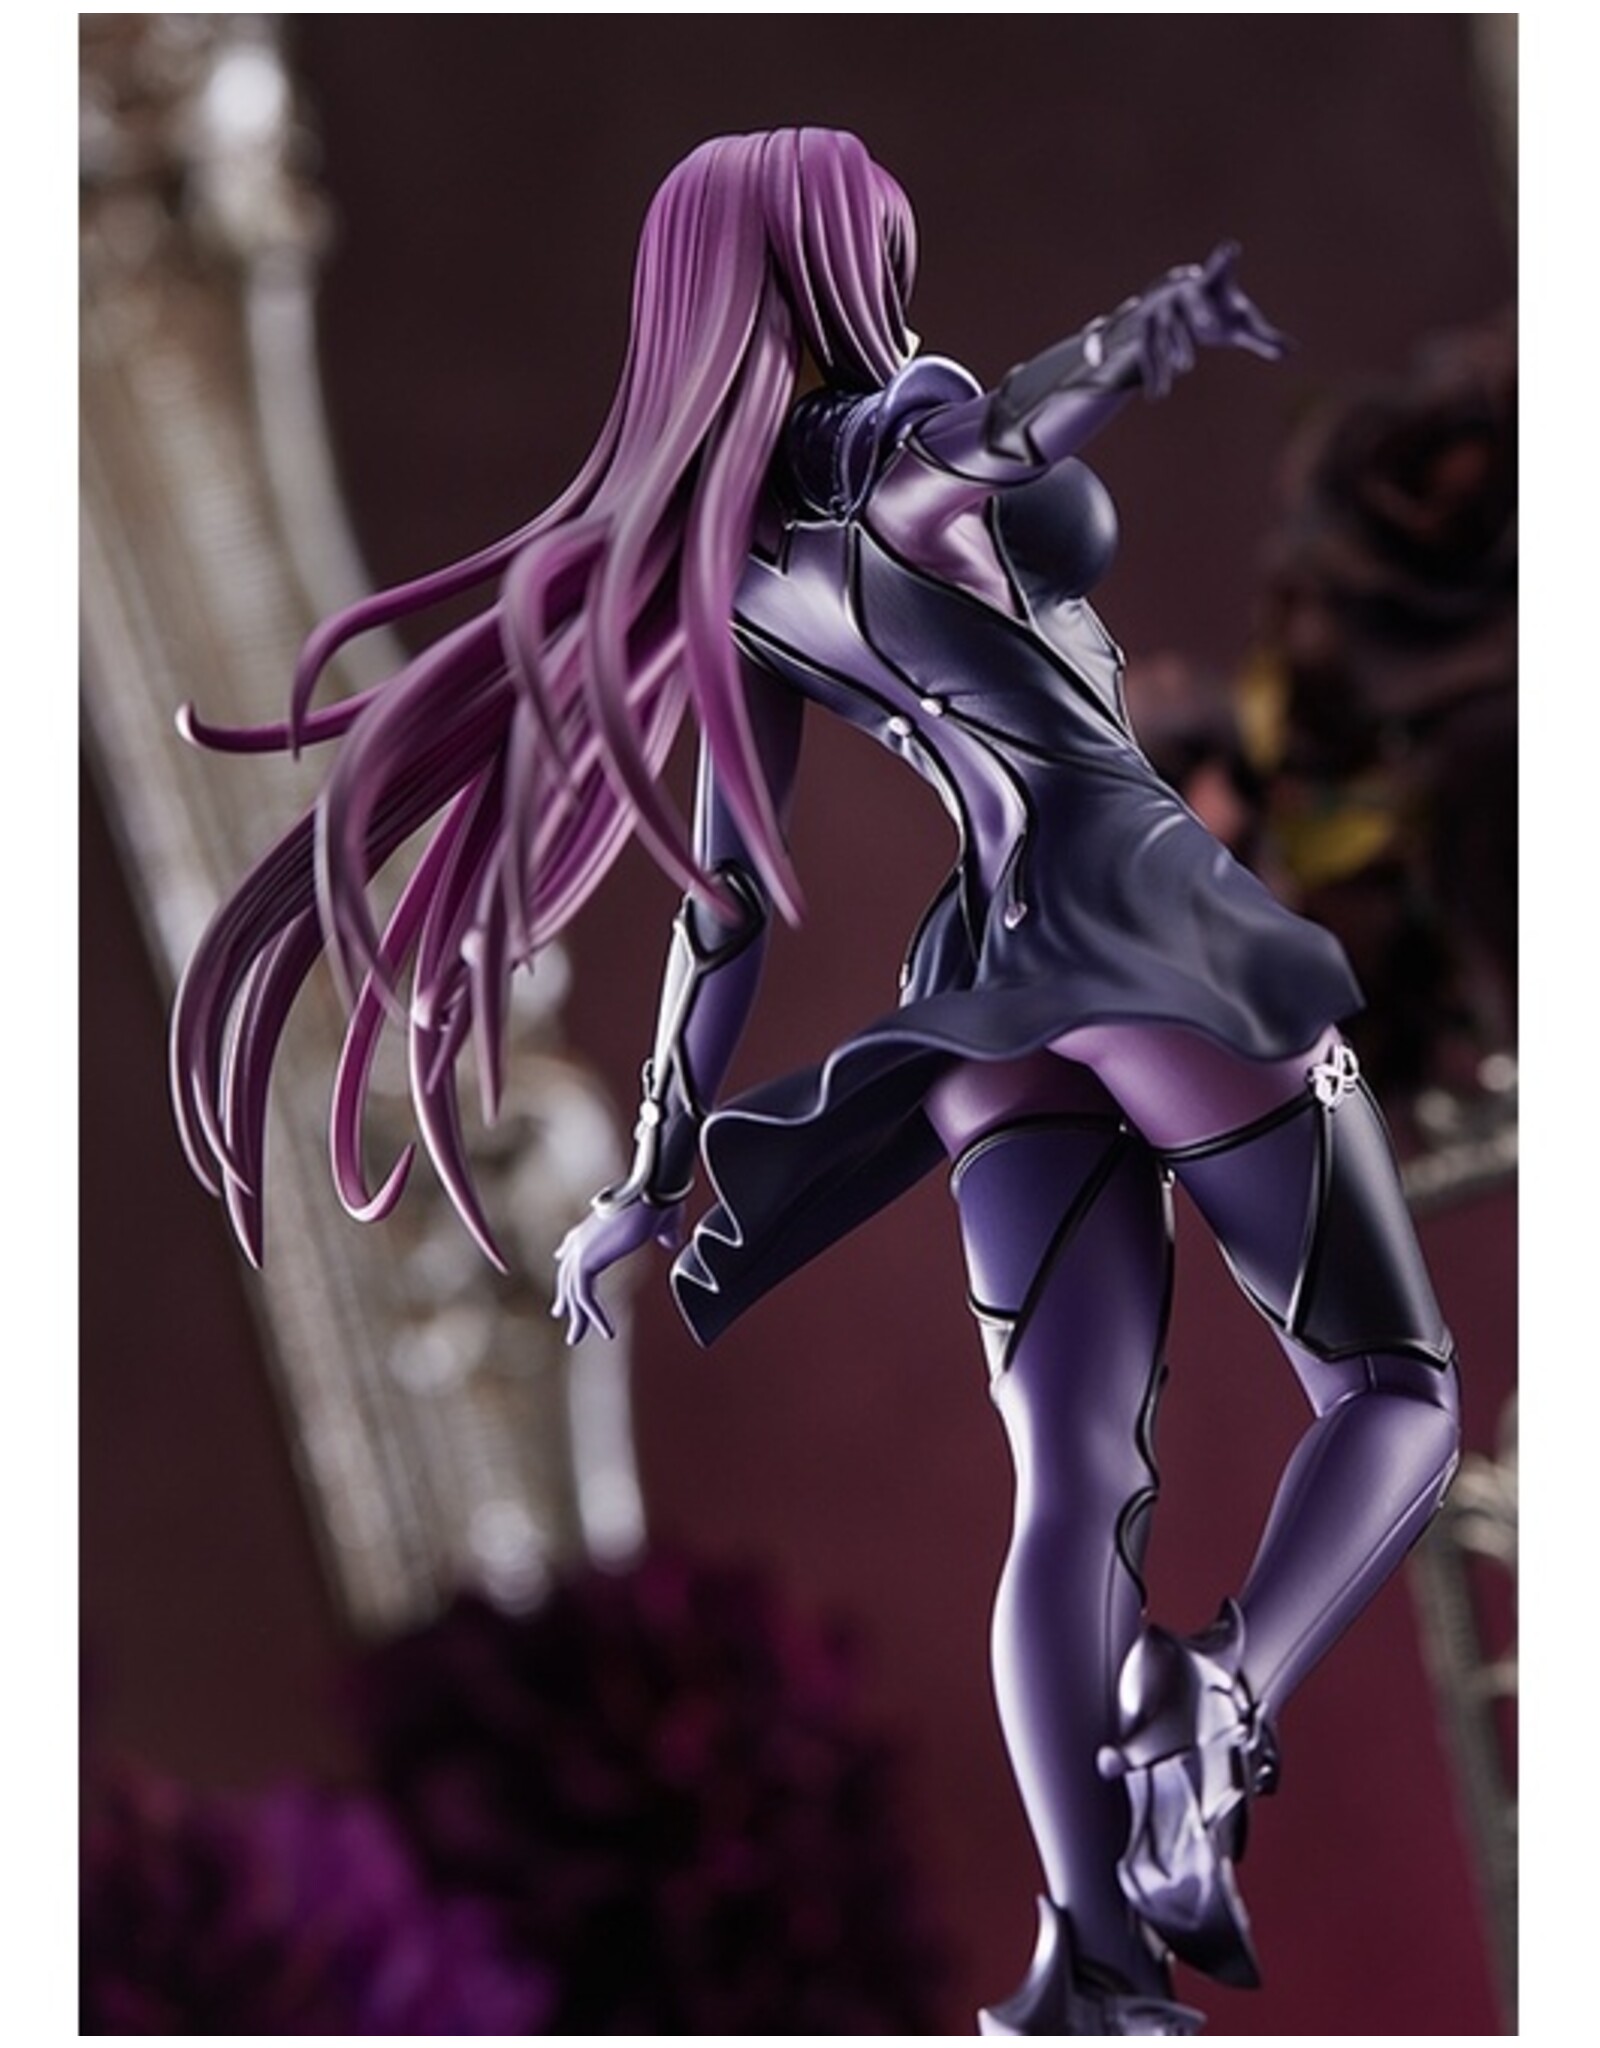 POP UP Parade: Fate/Grand Order - Scathach/Lancer